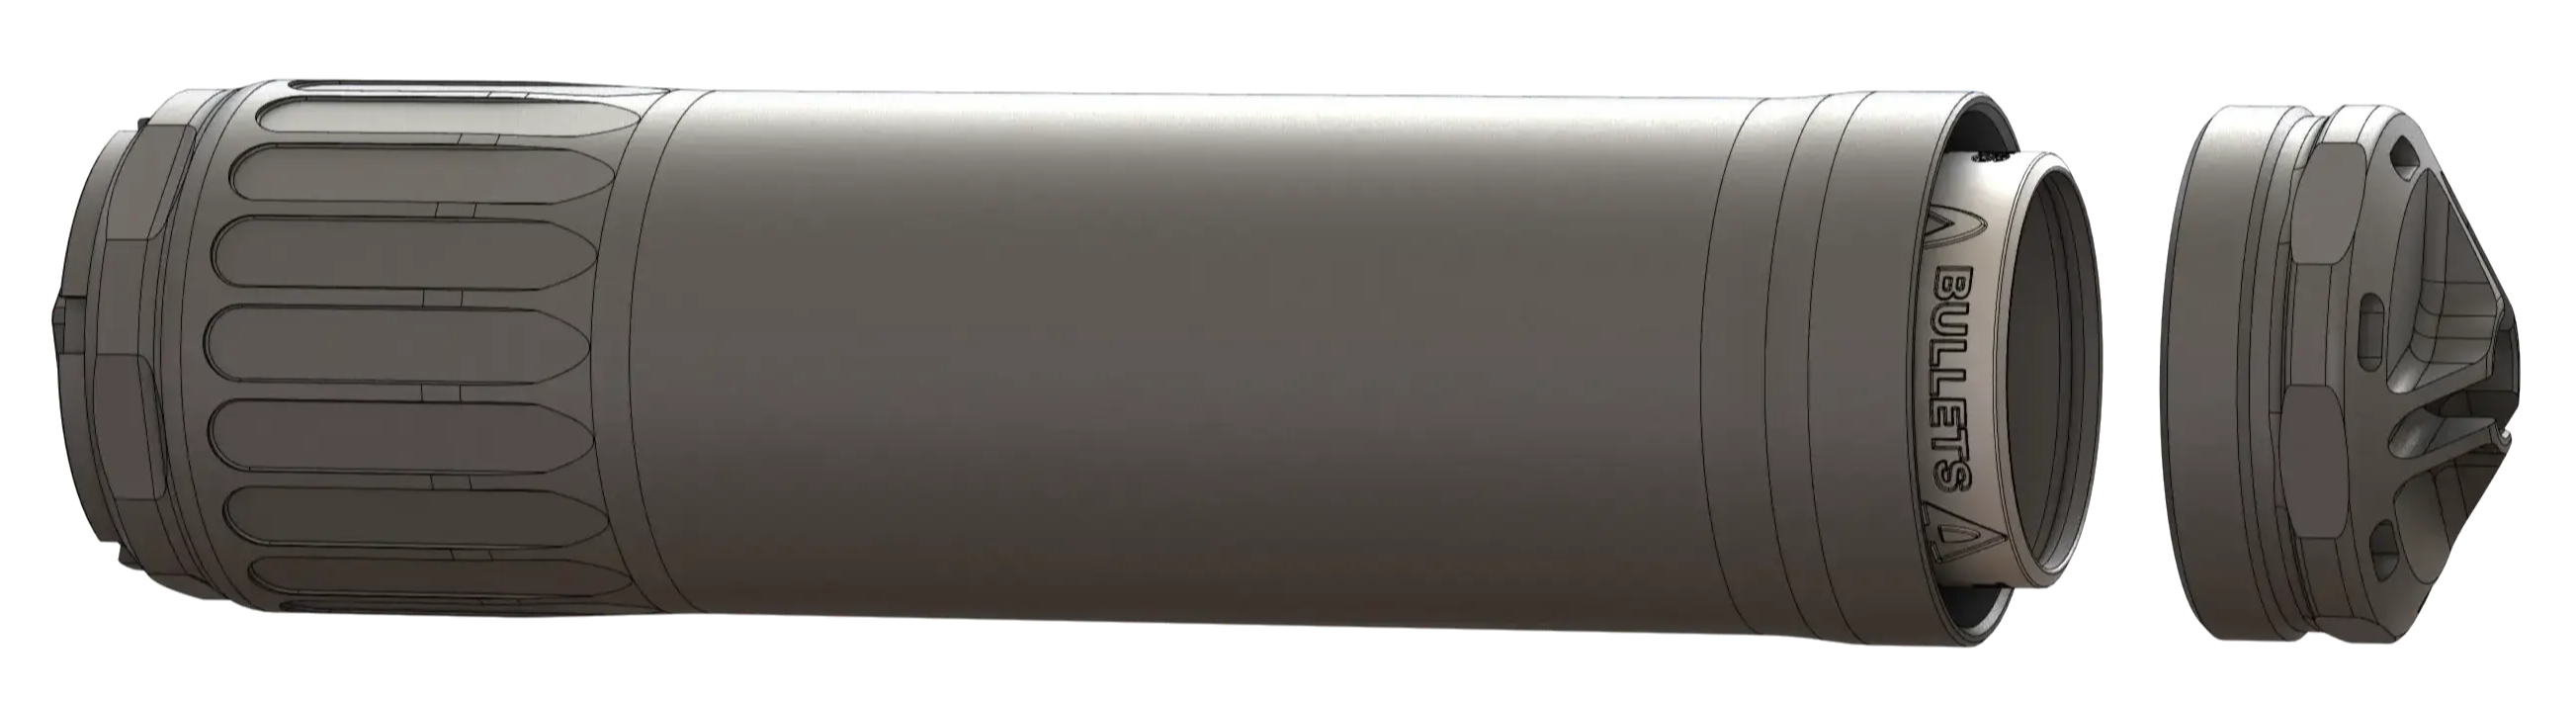 Image of VENTUM 762 Suppressor with the GEO front Cap removed to show you proper install of VENTUM FLOW Core. Bullet symbol facing to the direction of front cap. 